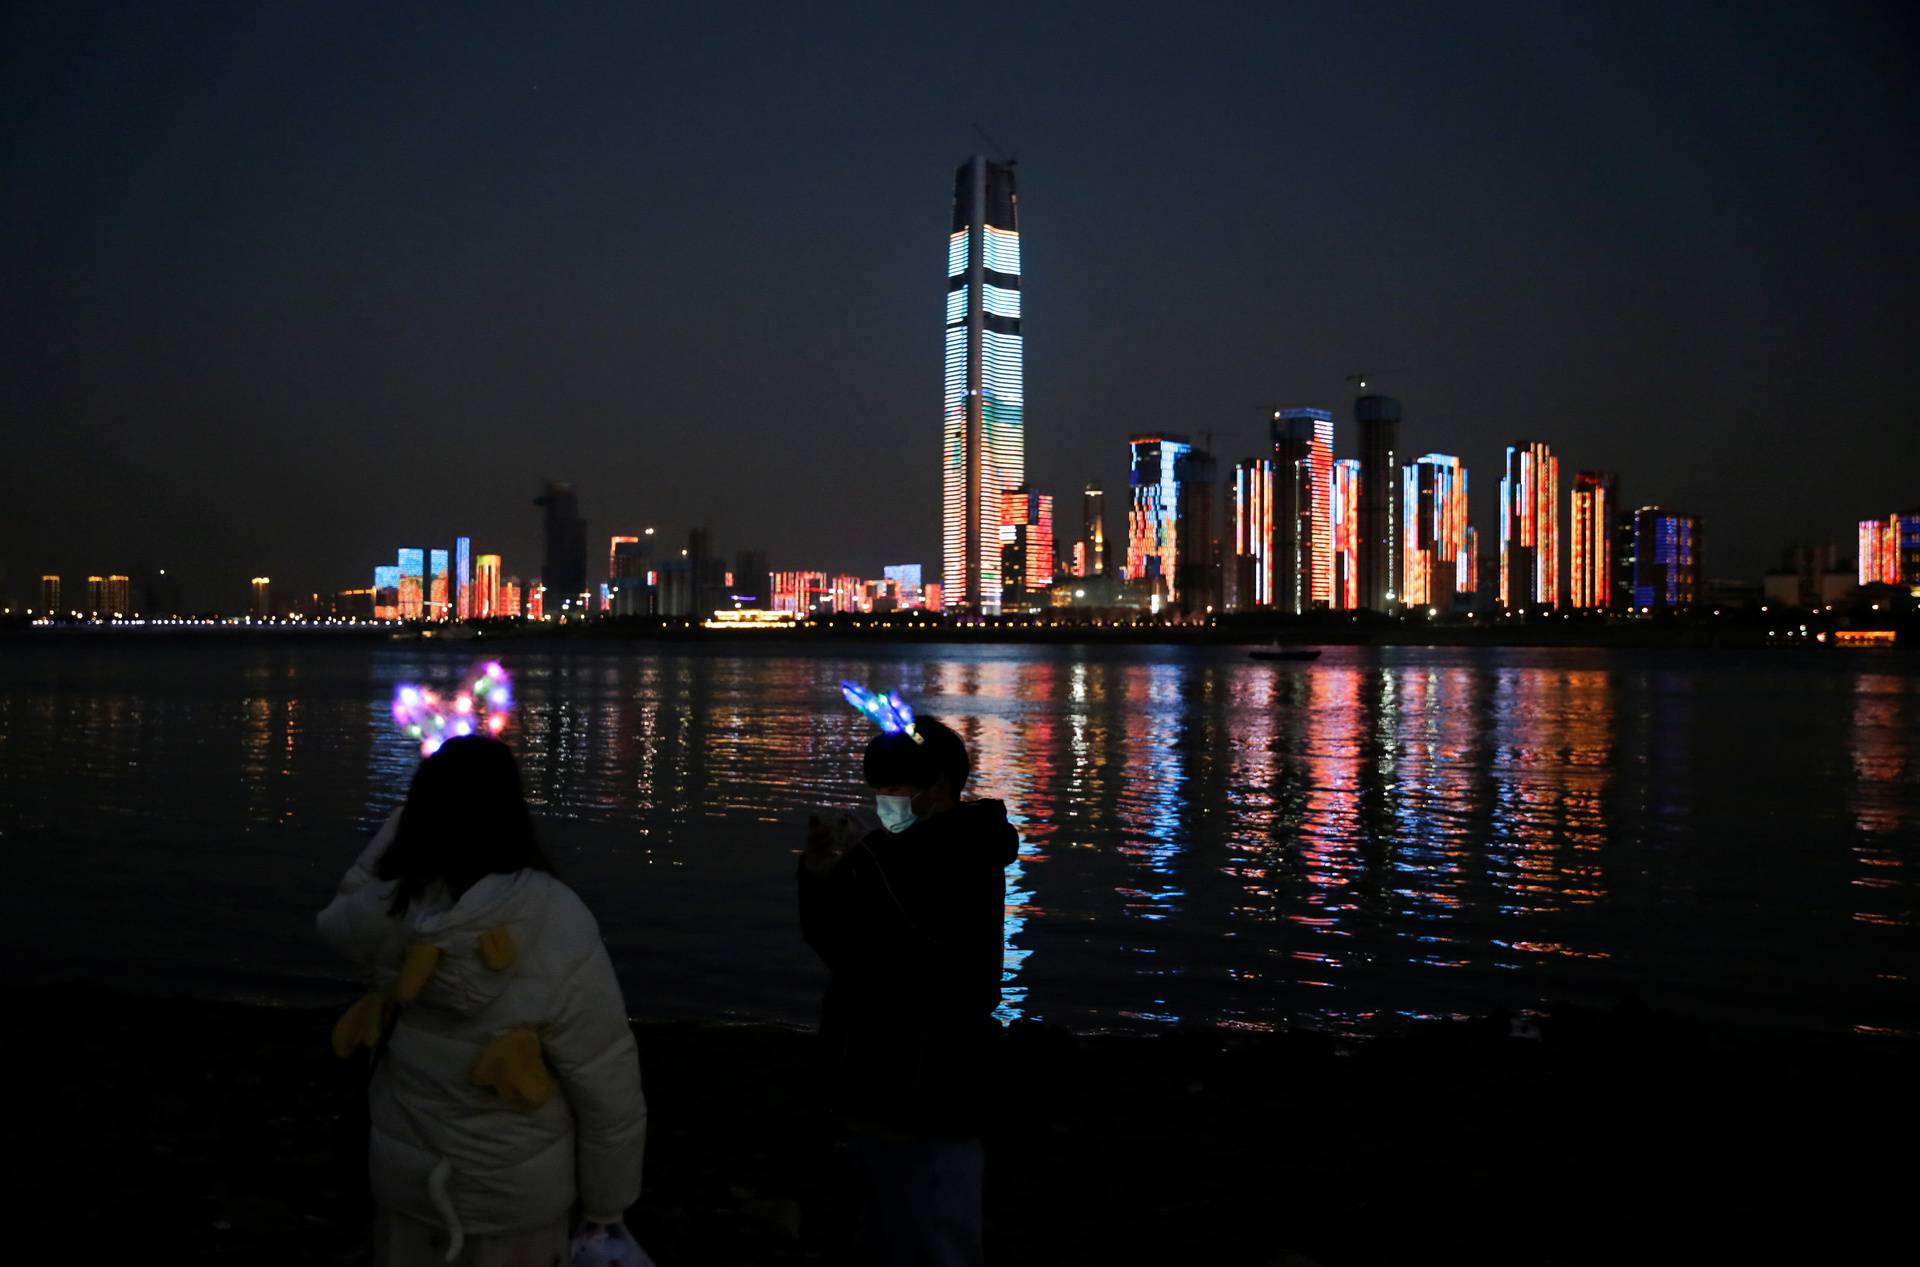 Light show is projected on buildings by a river on New Year's Eve in Wuhan